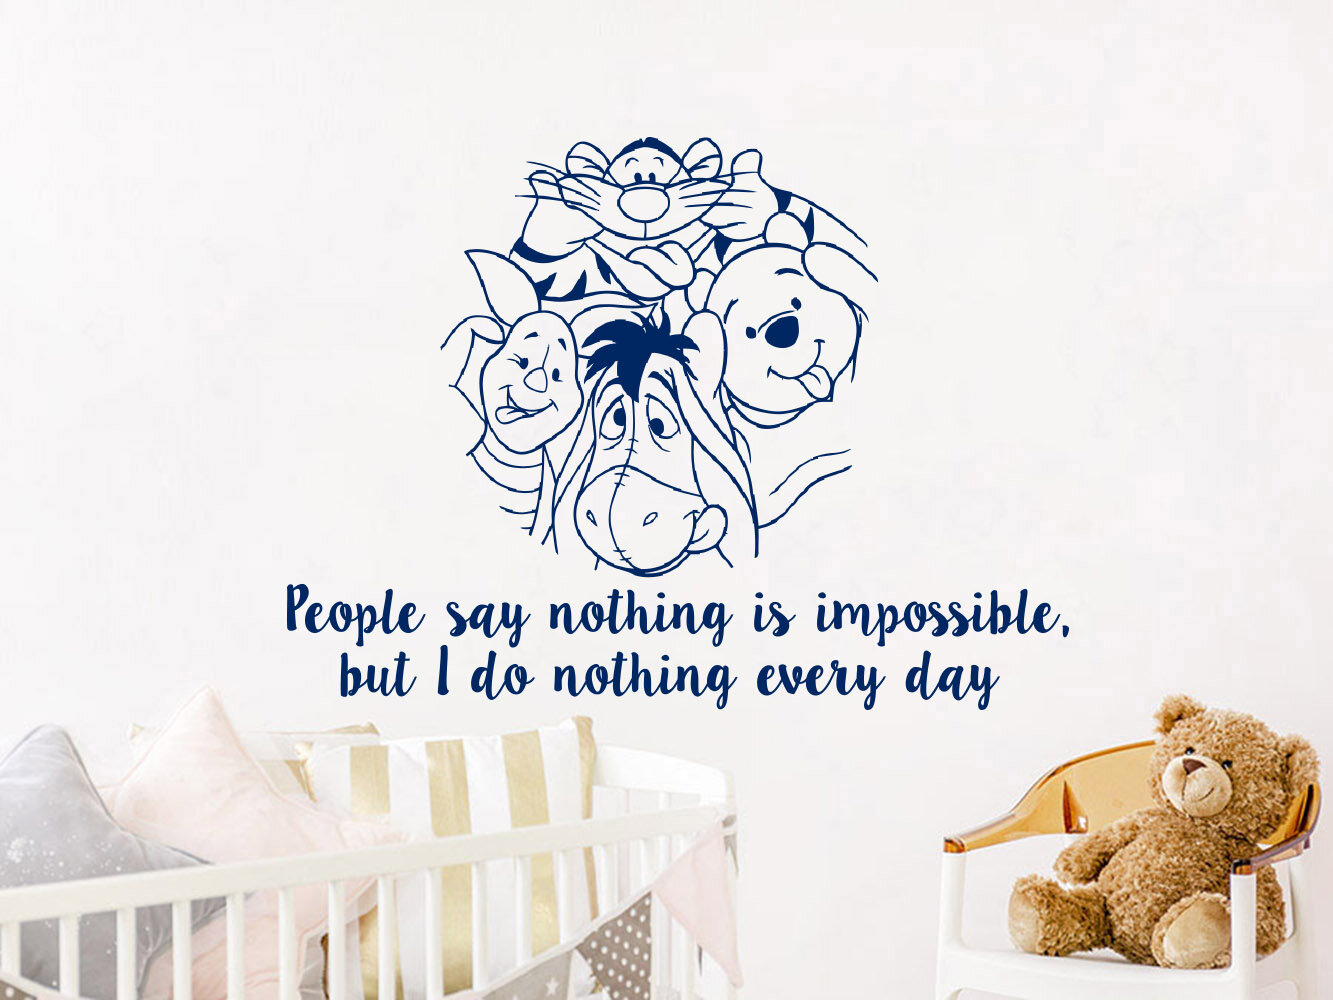 Winnie The Pooh Wall Decals Small Thing in Heart Vinyl Quote Decal Nursery L344 